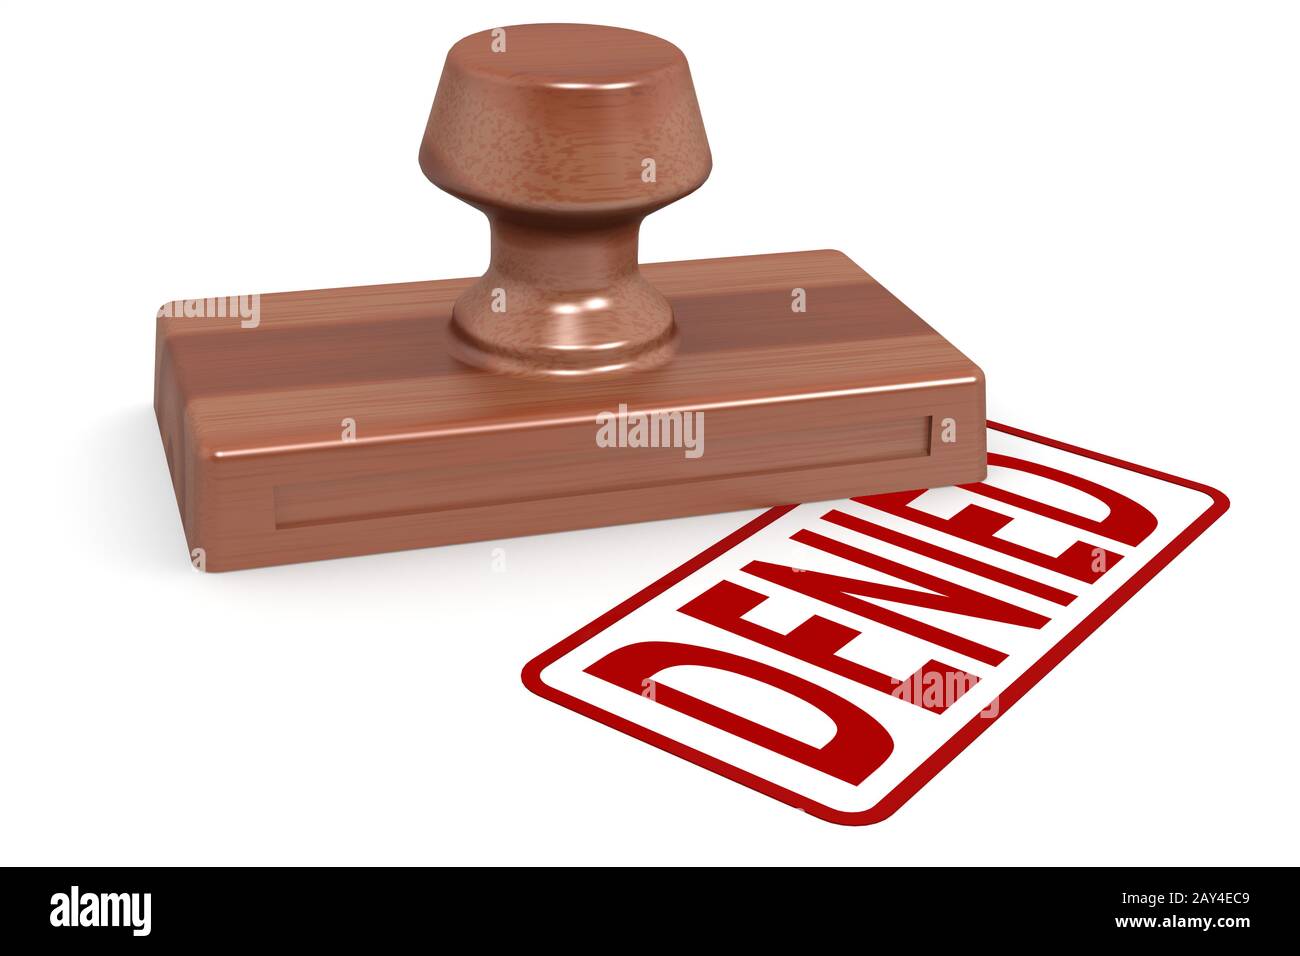 Wooden stamp denied with red text Stock Photo